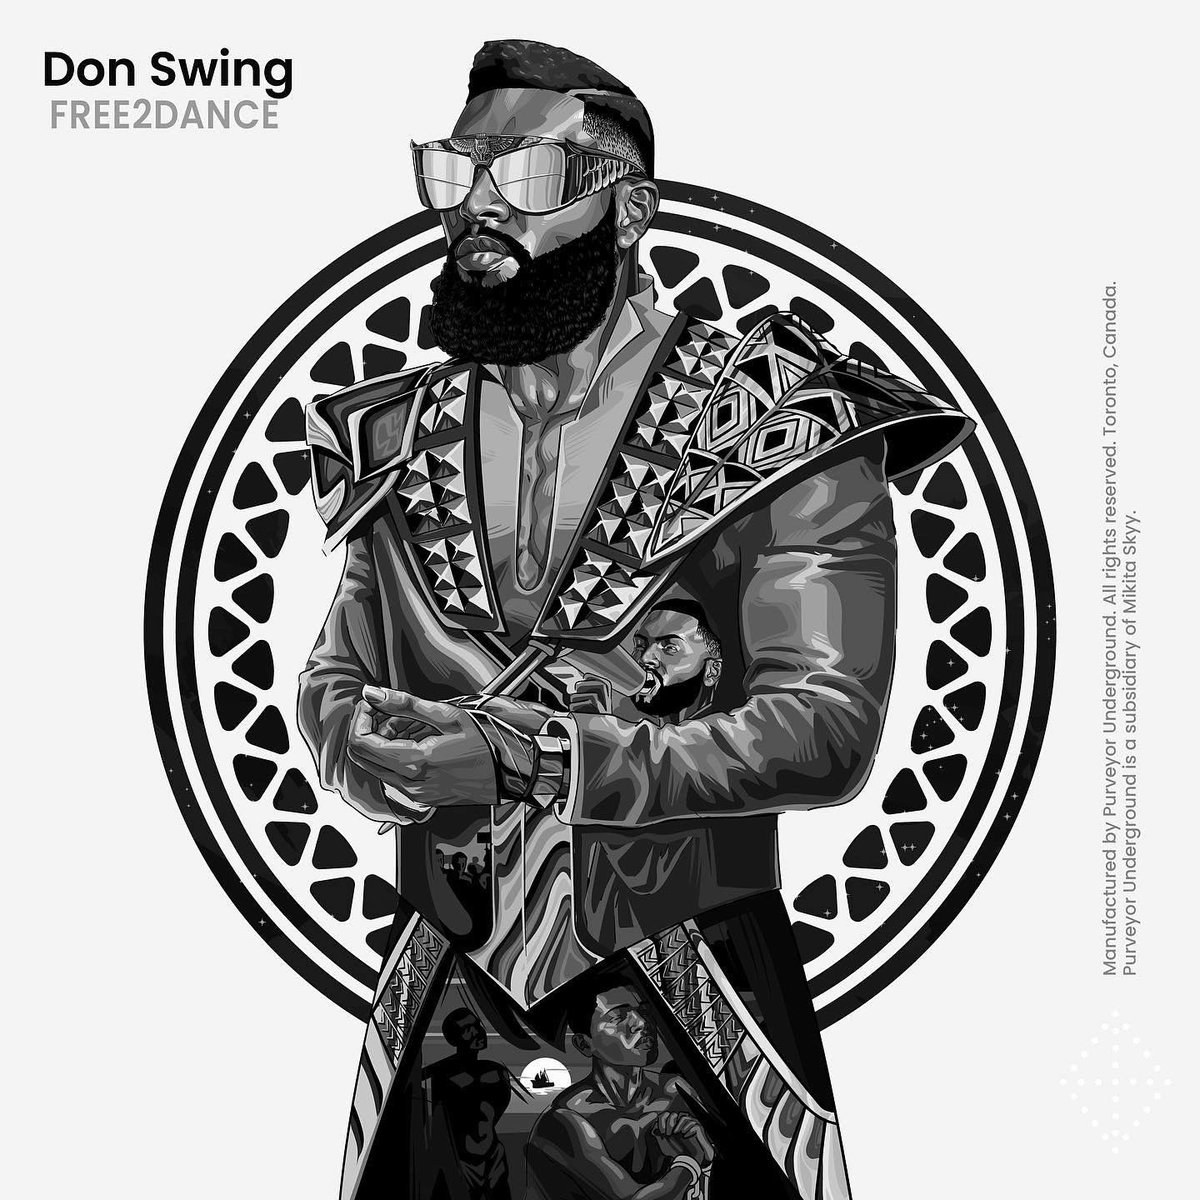 OUT NOW! FREE2DANCE EP by Don Swing. Exclusively on @beatport